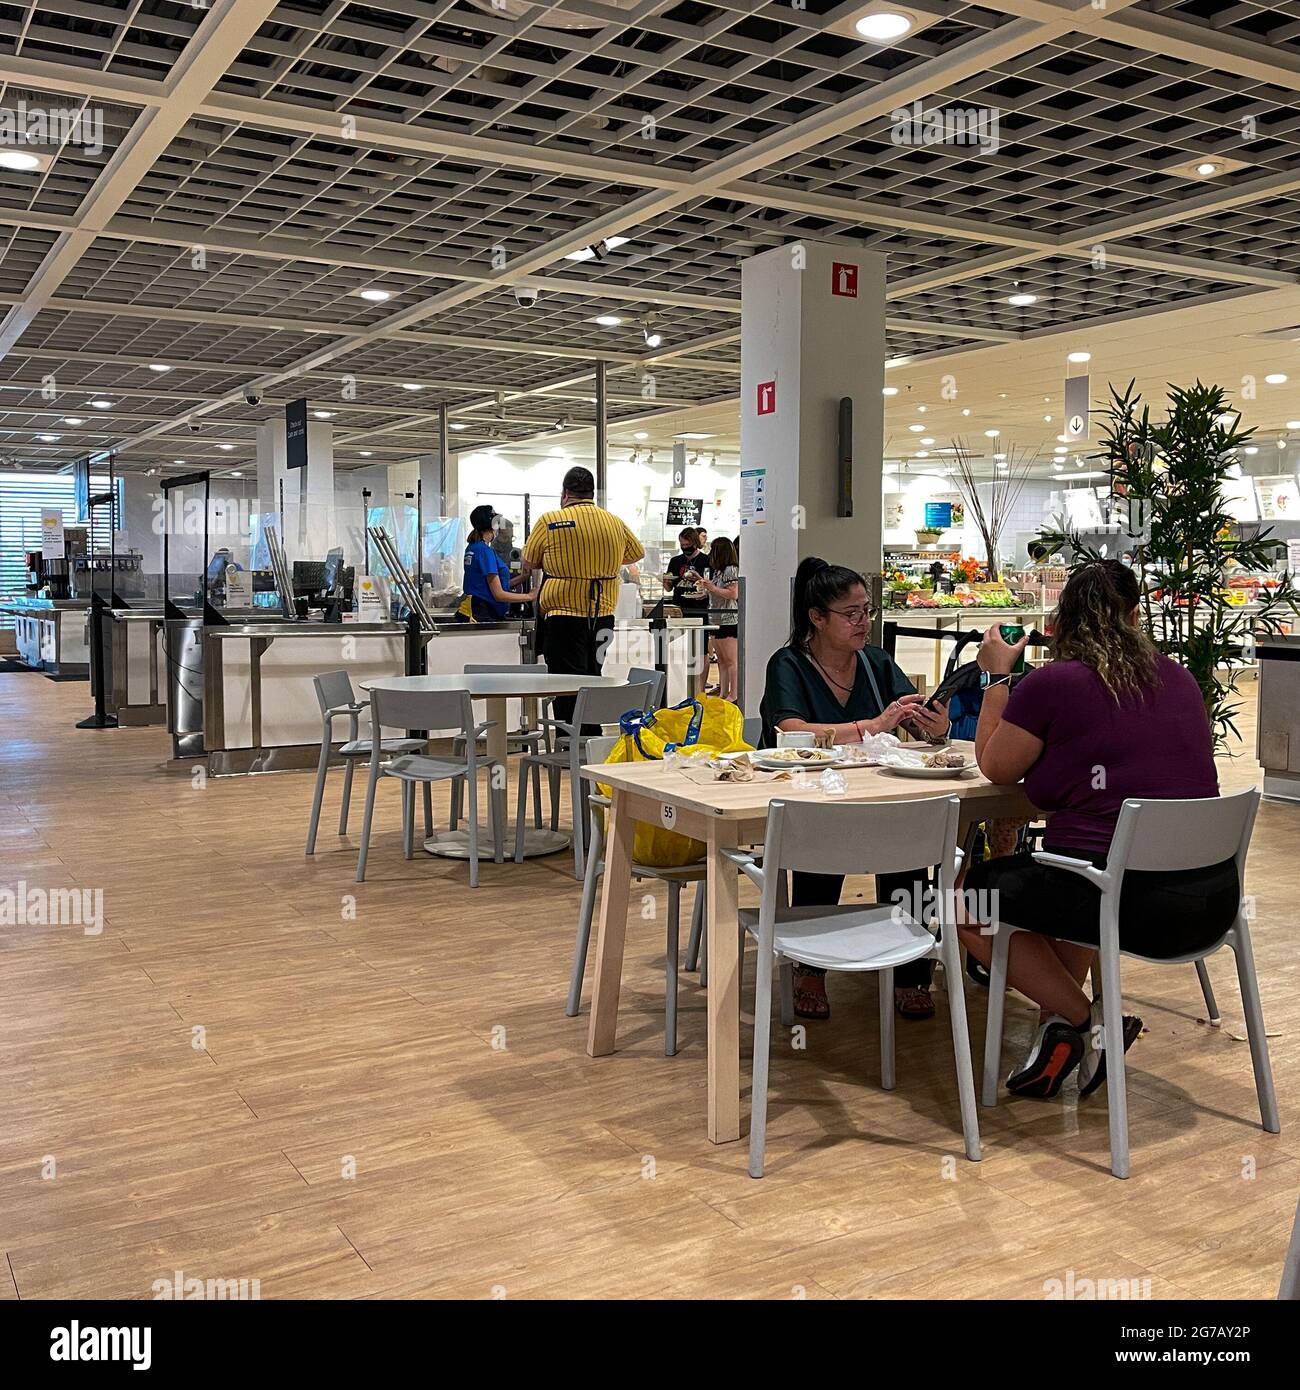 Orlando, FL USA - May 31, 2021: The restaurant in the IKEA Home Furnishings retail store.  IKEA sells ready to assemble inexpensive furniture and home Stock Photo